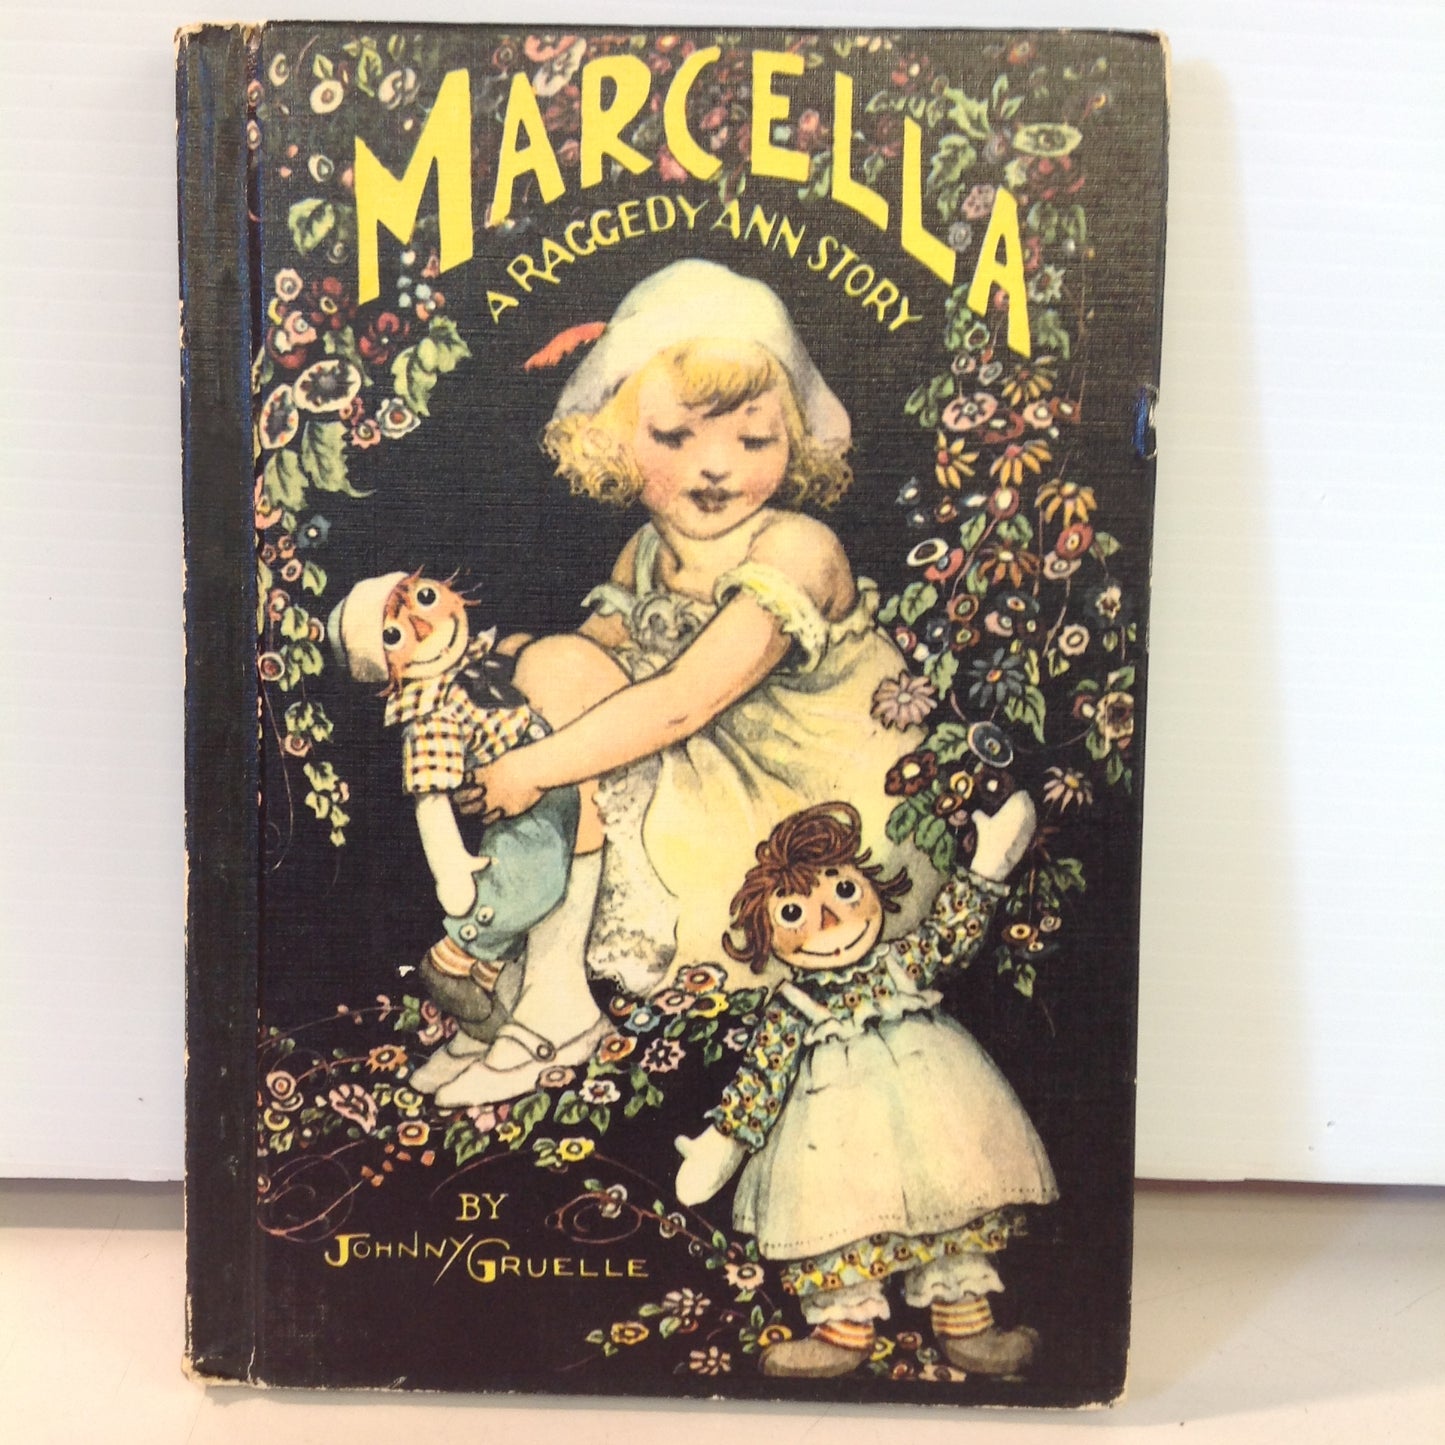 Vintage 1960 M A Donohue Hardcover Book Marcella, A Raggedy Ann Story by Johnny Gruelle